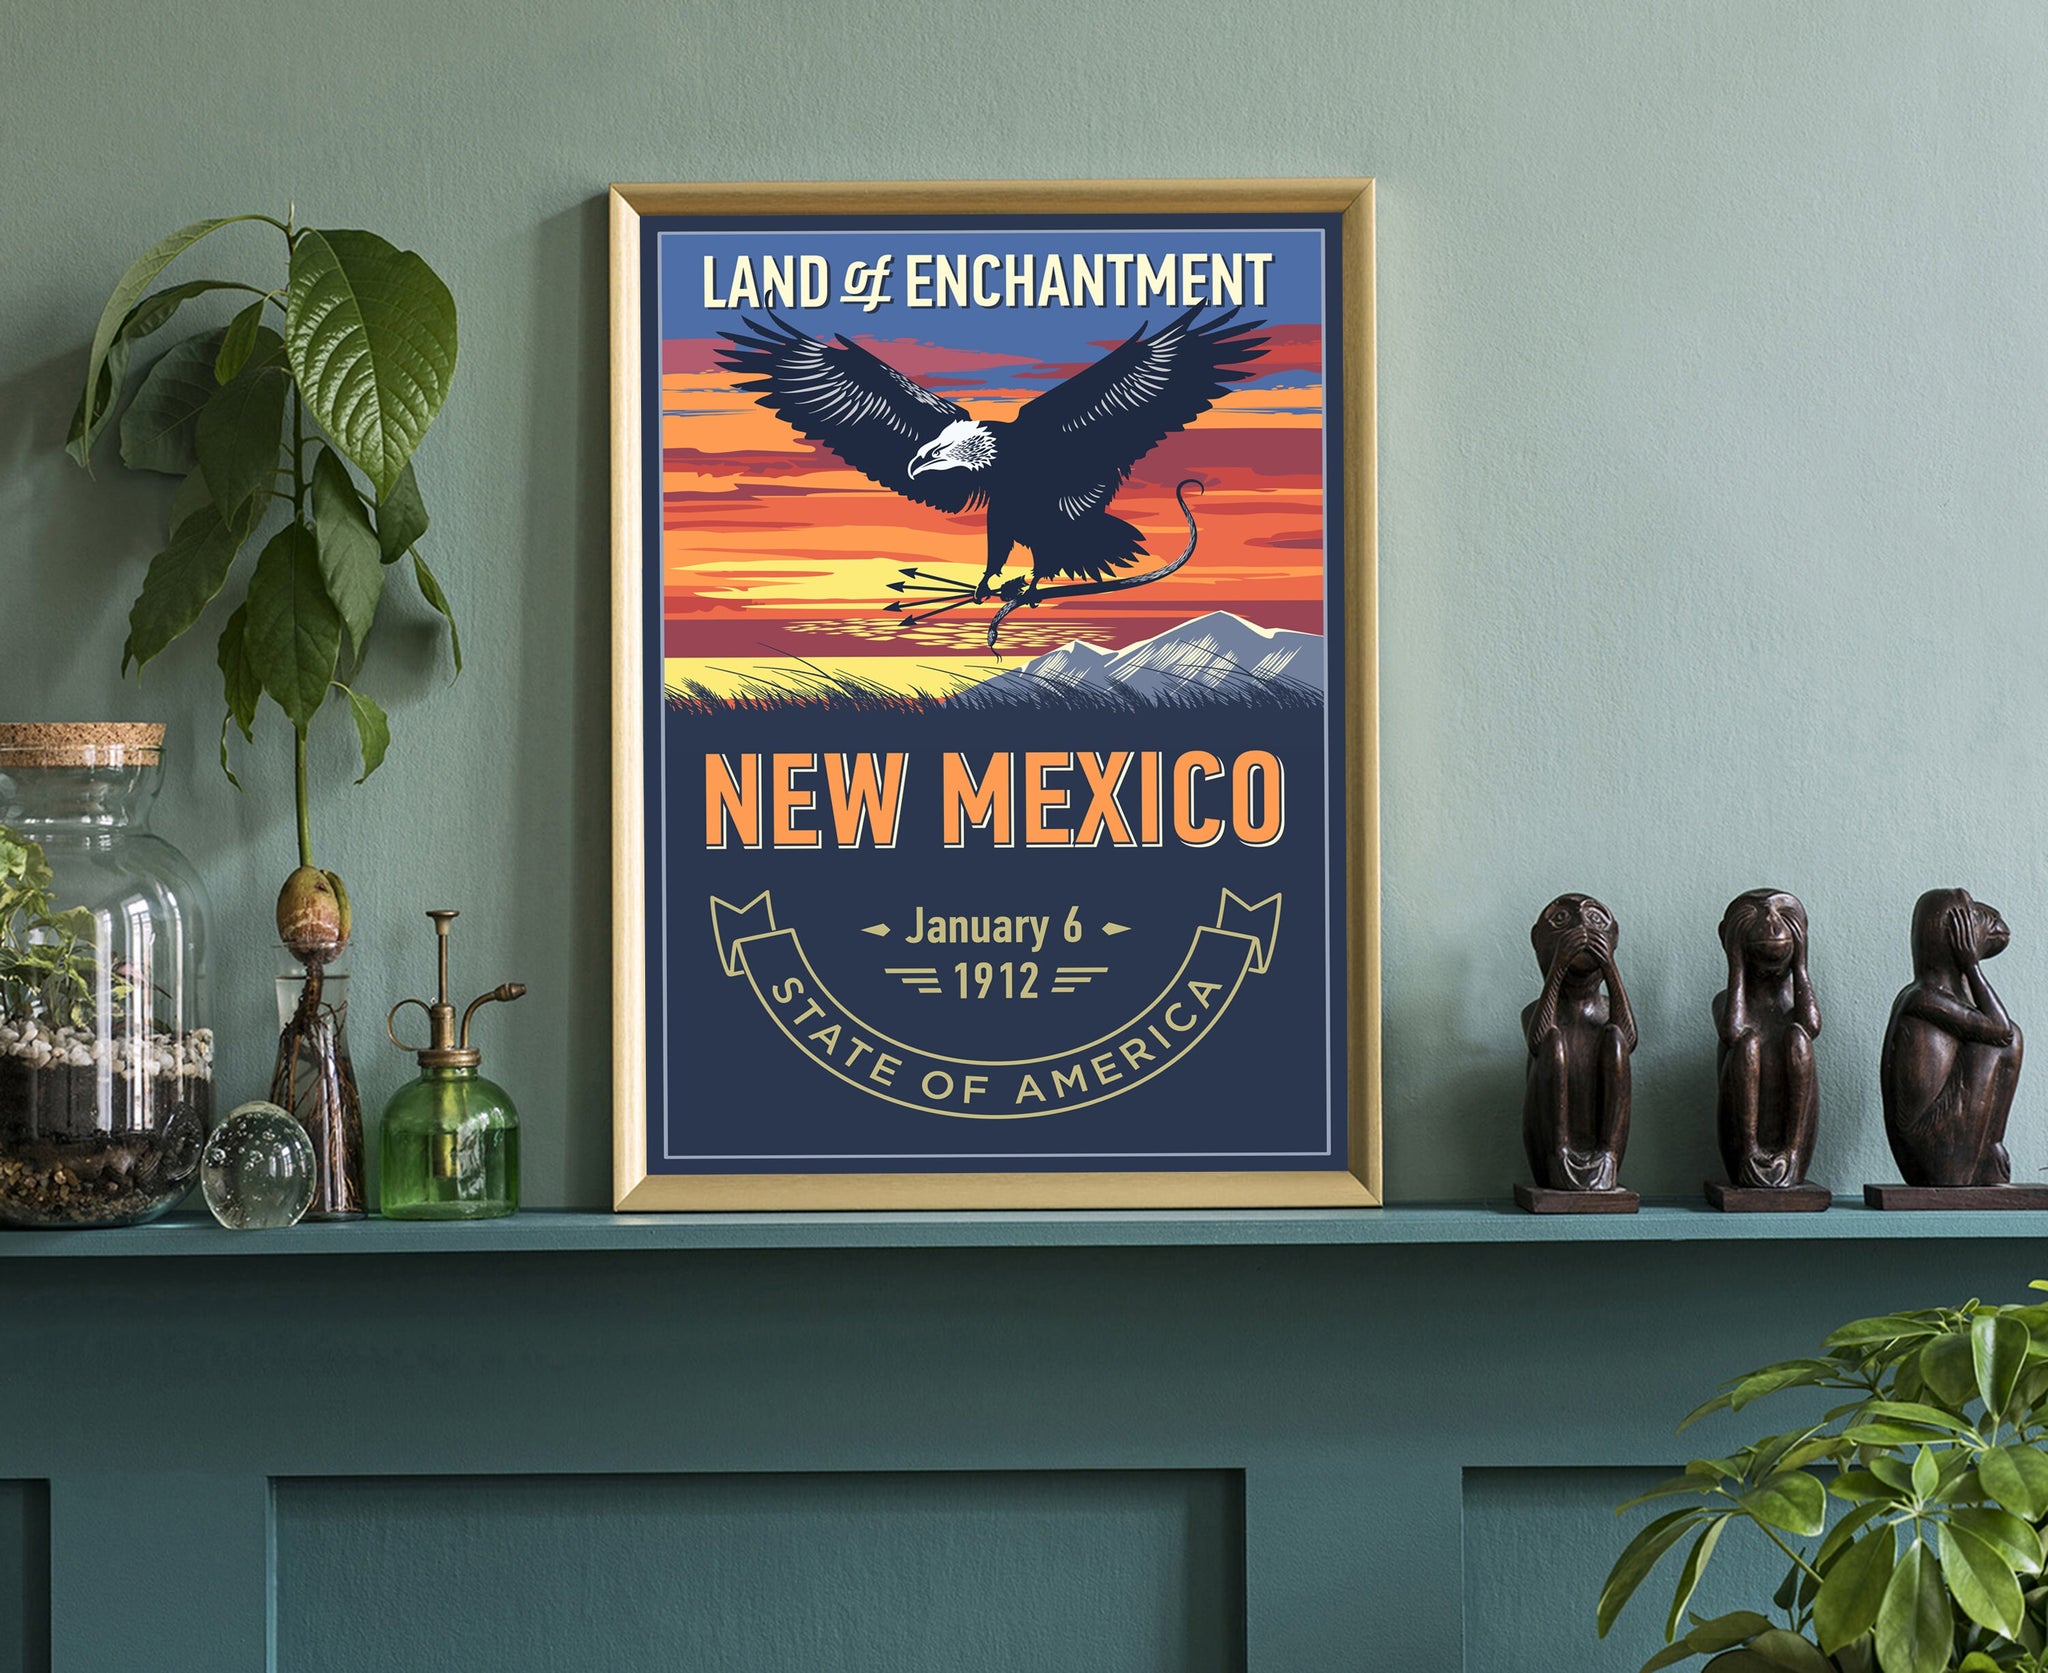 United States Poster, New Mexico State Poster Print, New Mexico State Emblem Poster, Retro Travel State Poster, Home Office Wall Art